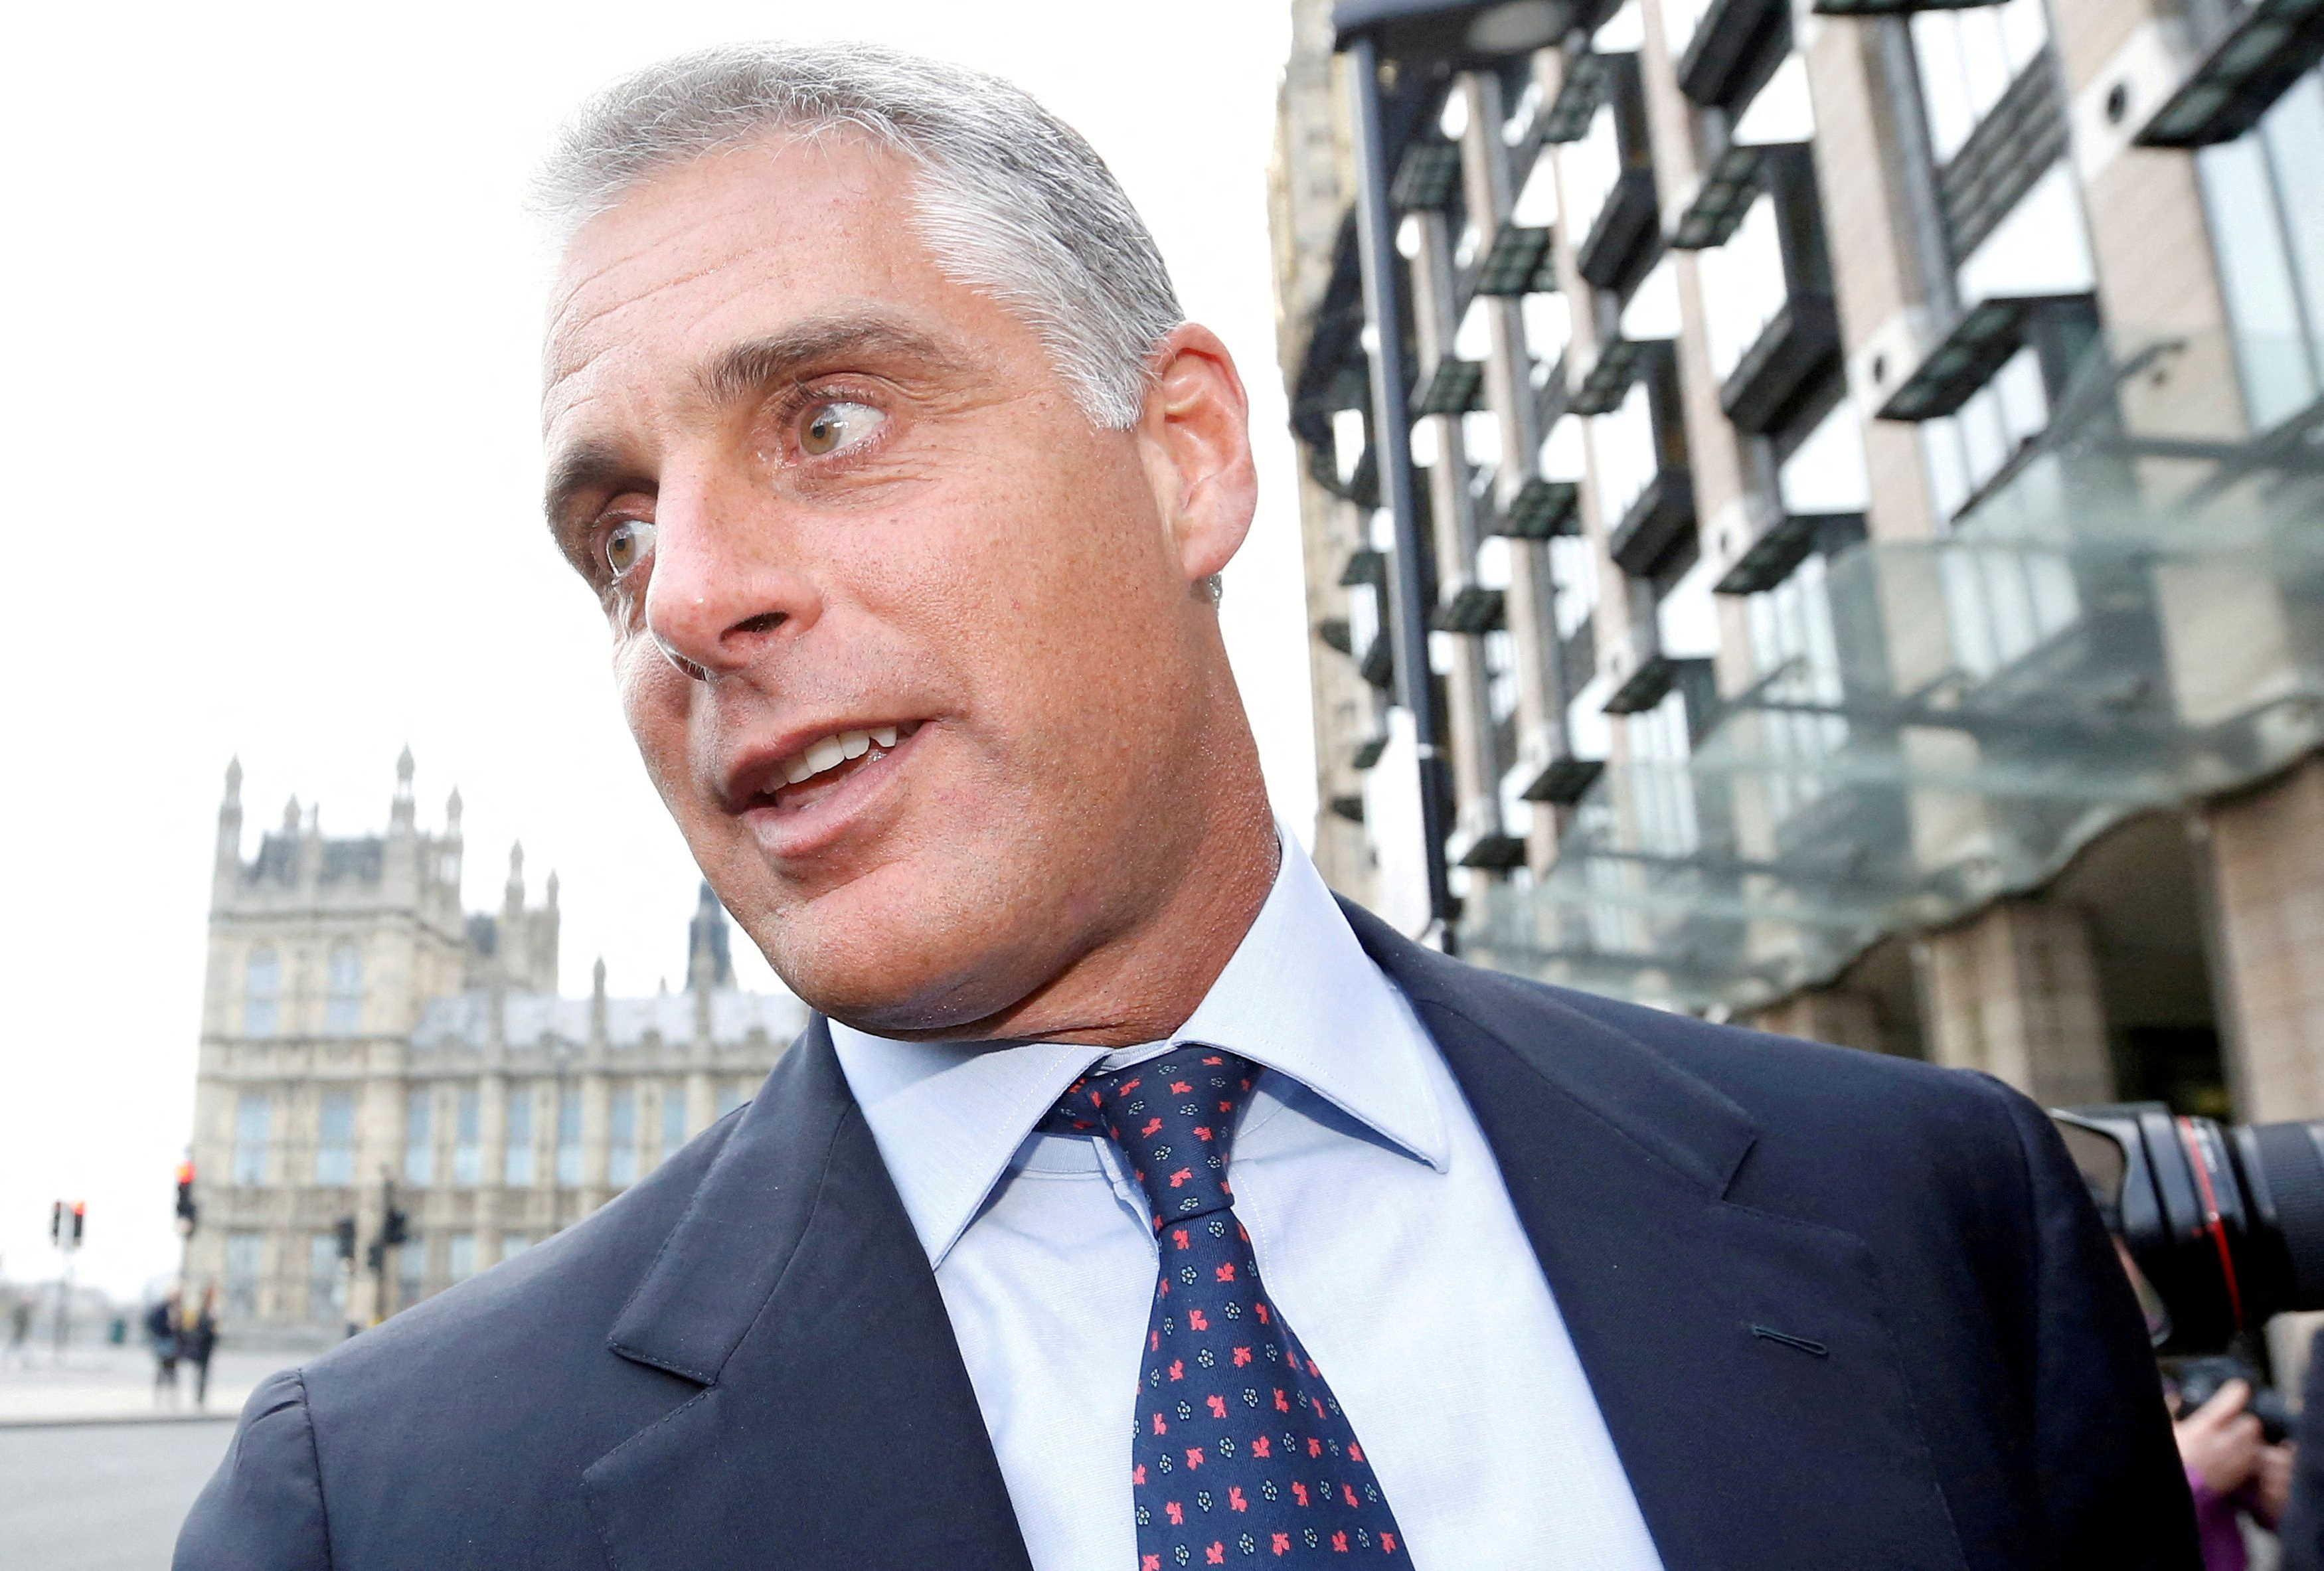 UniCredit's new CEO Andrea Orcel pictured in 2013